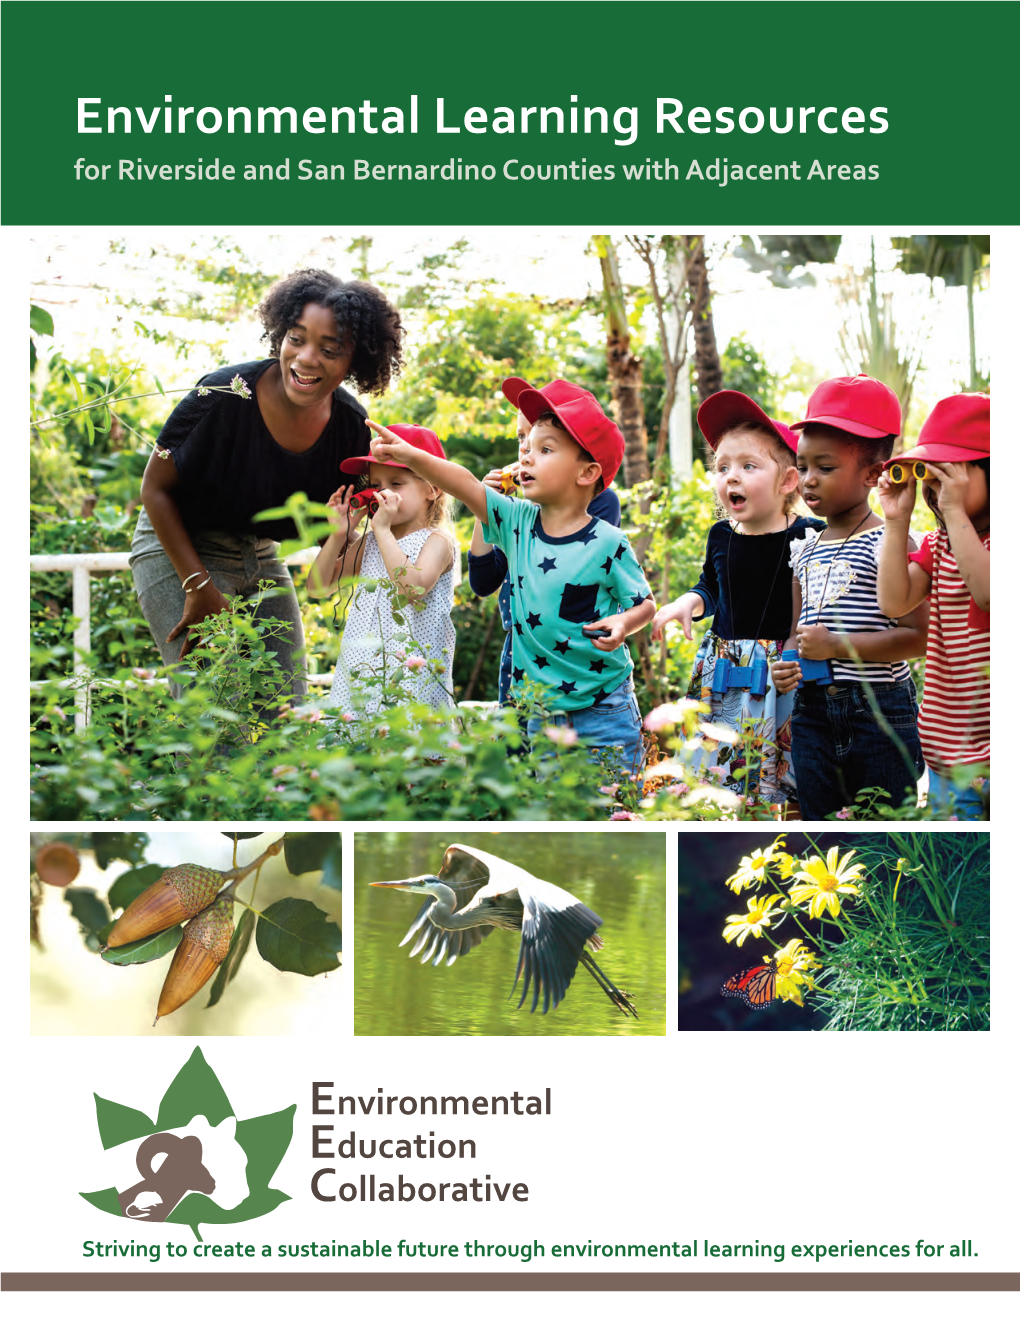 Environmental Learning Resources Guide Was Developed to Help Educators and Community Members Find Sites and Programs About Natural Resources and Sustainability